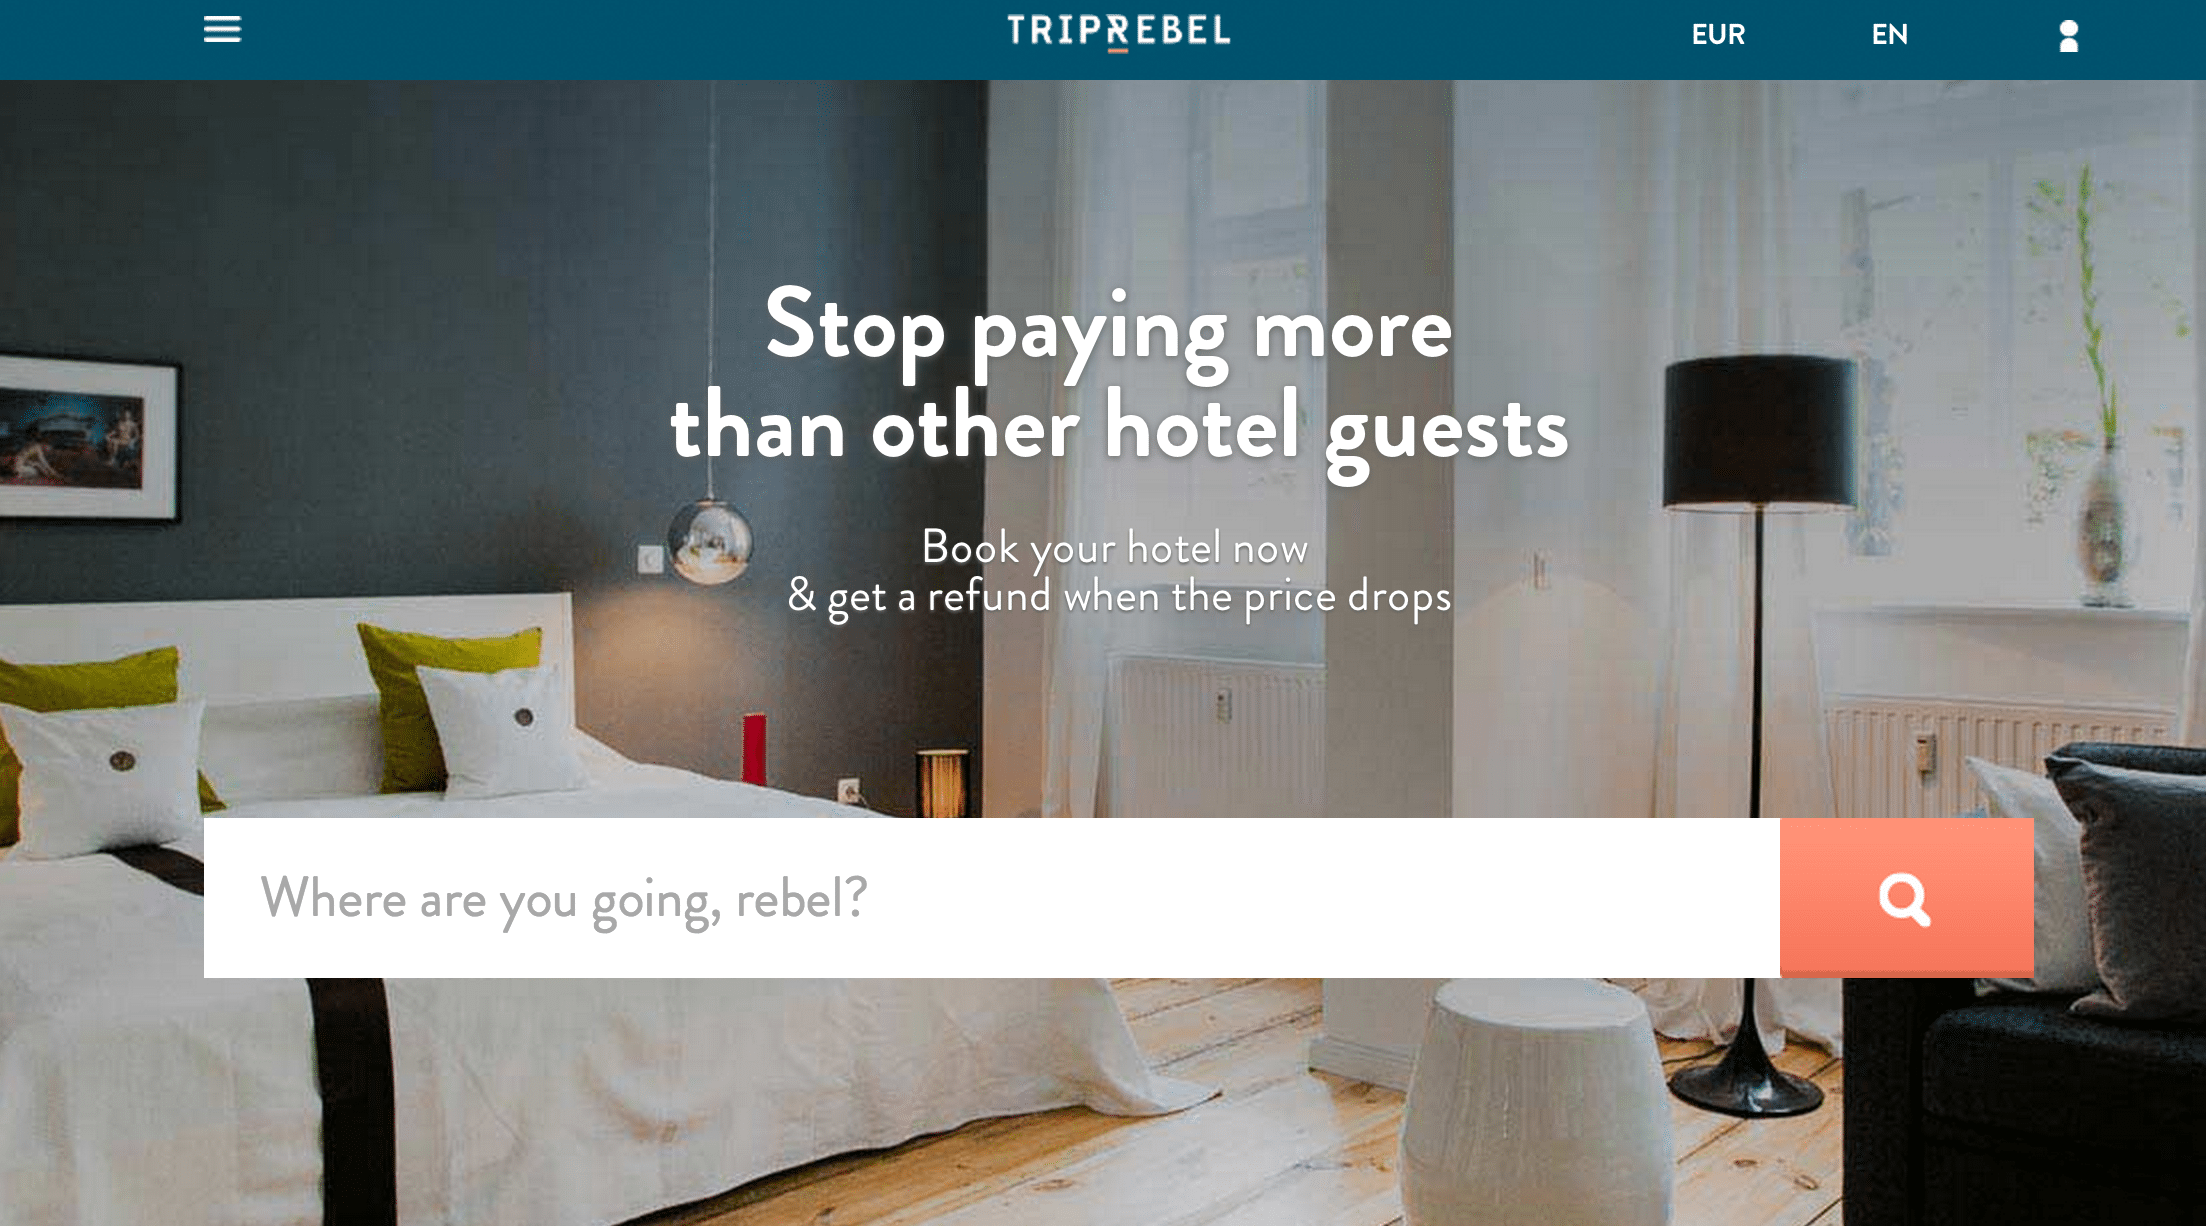 tripREBEL is an online travel agent for hotels.